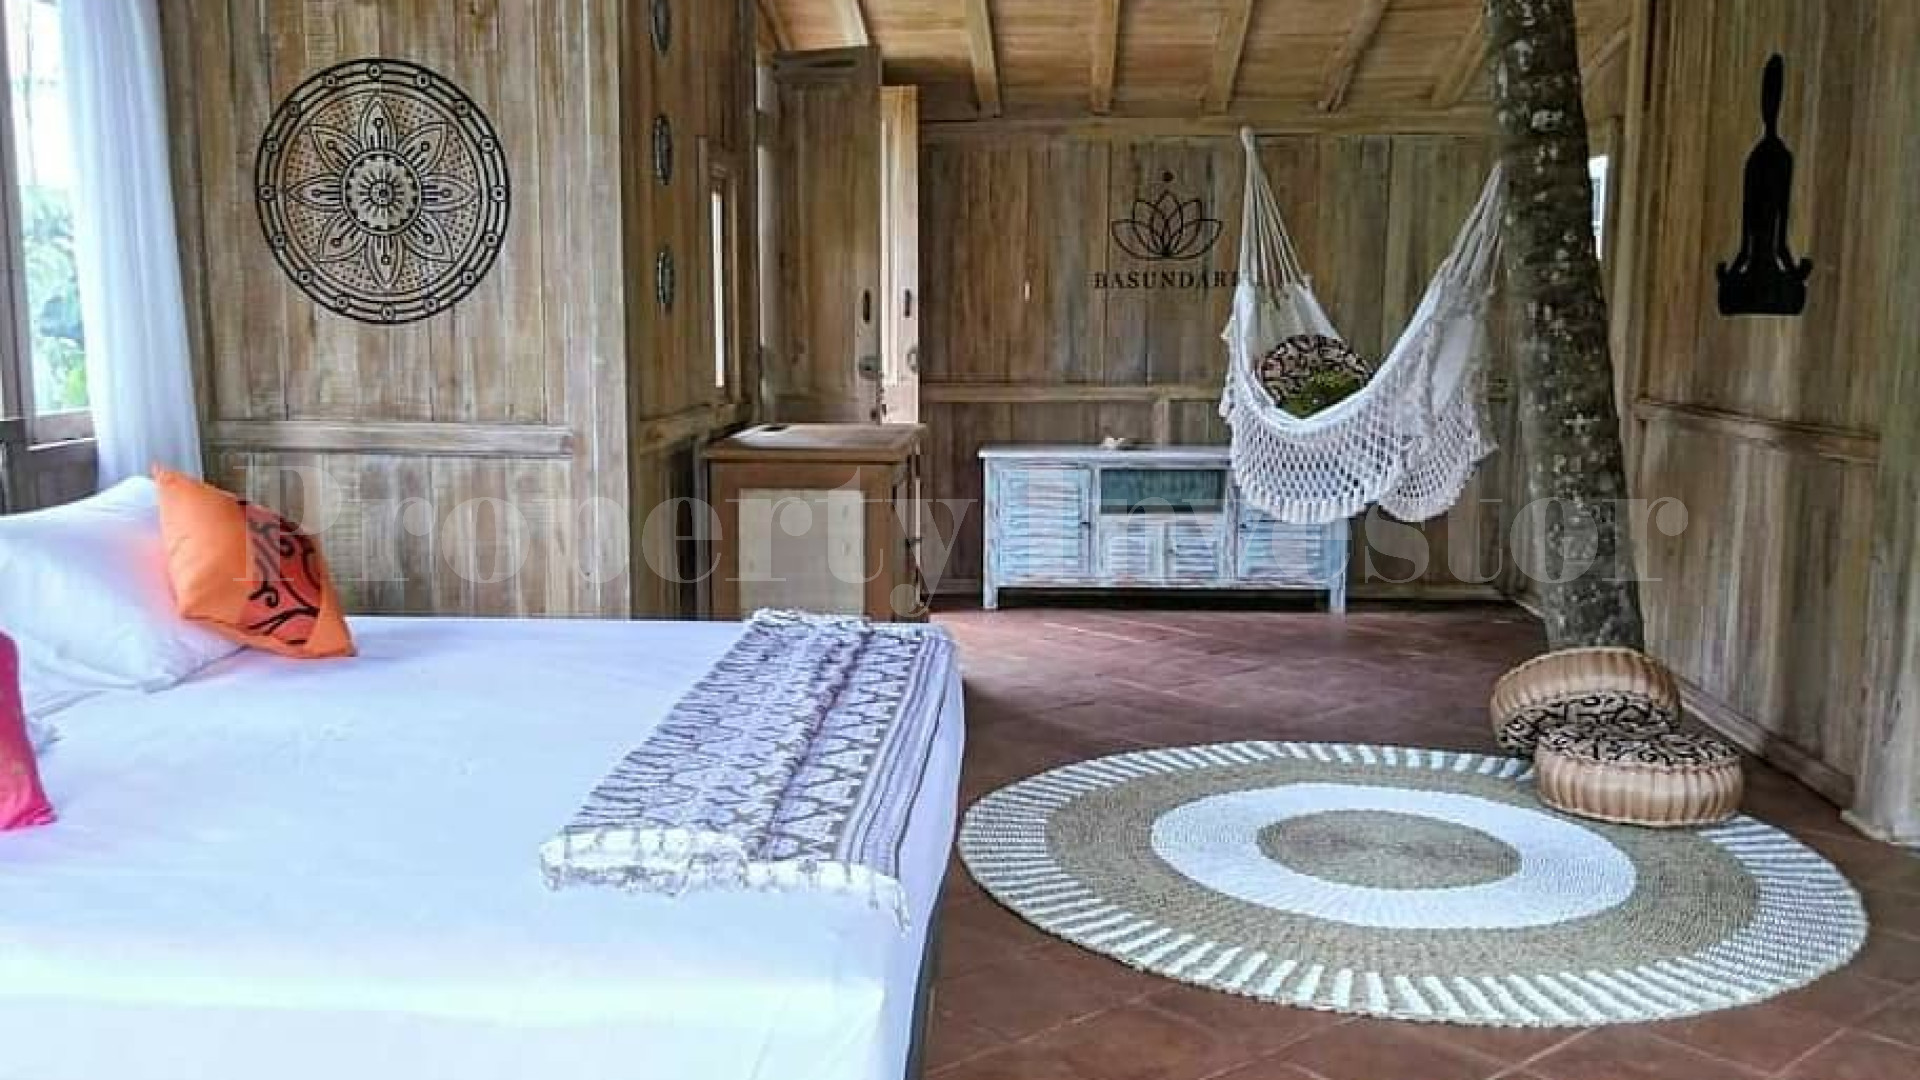 Brand New 11 Bedroom Commercial Retreat Centre with Ready Company for Sale in East Ubud, Bali